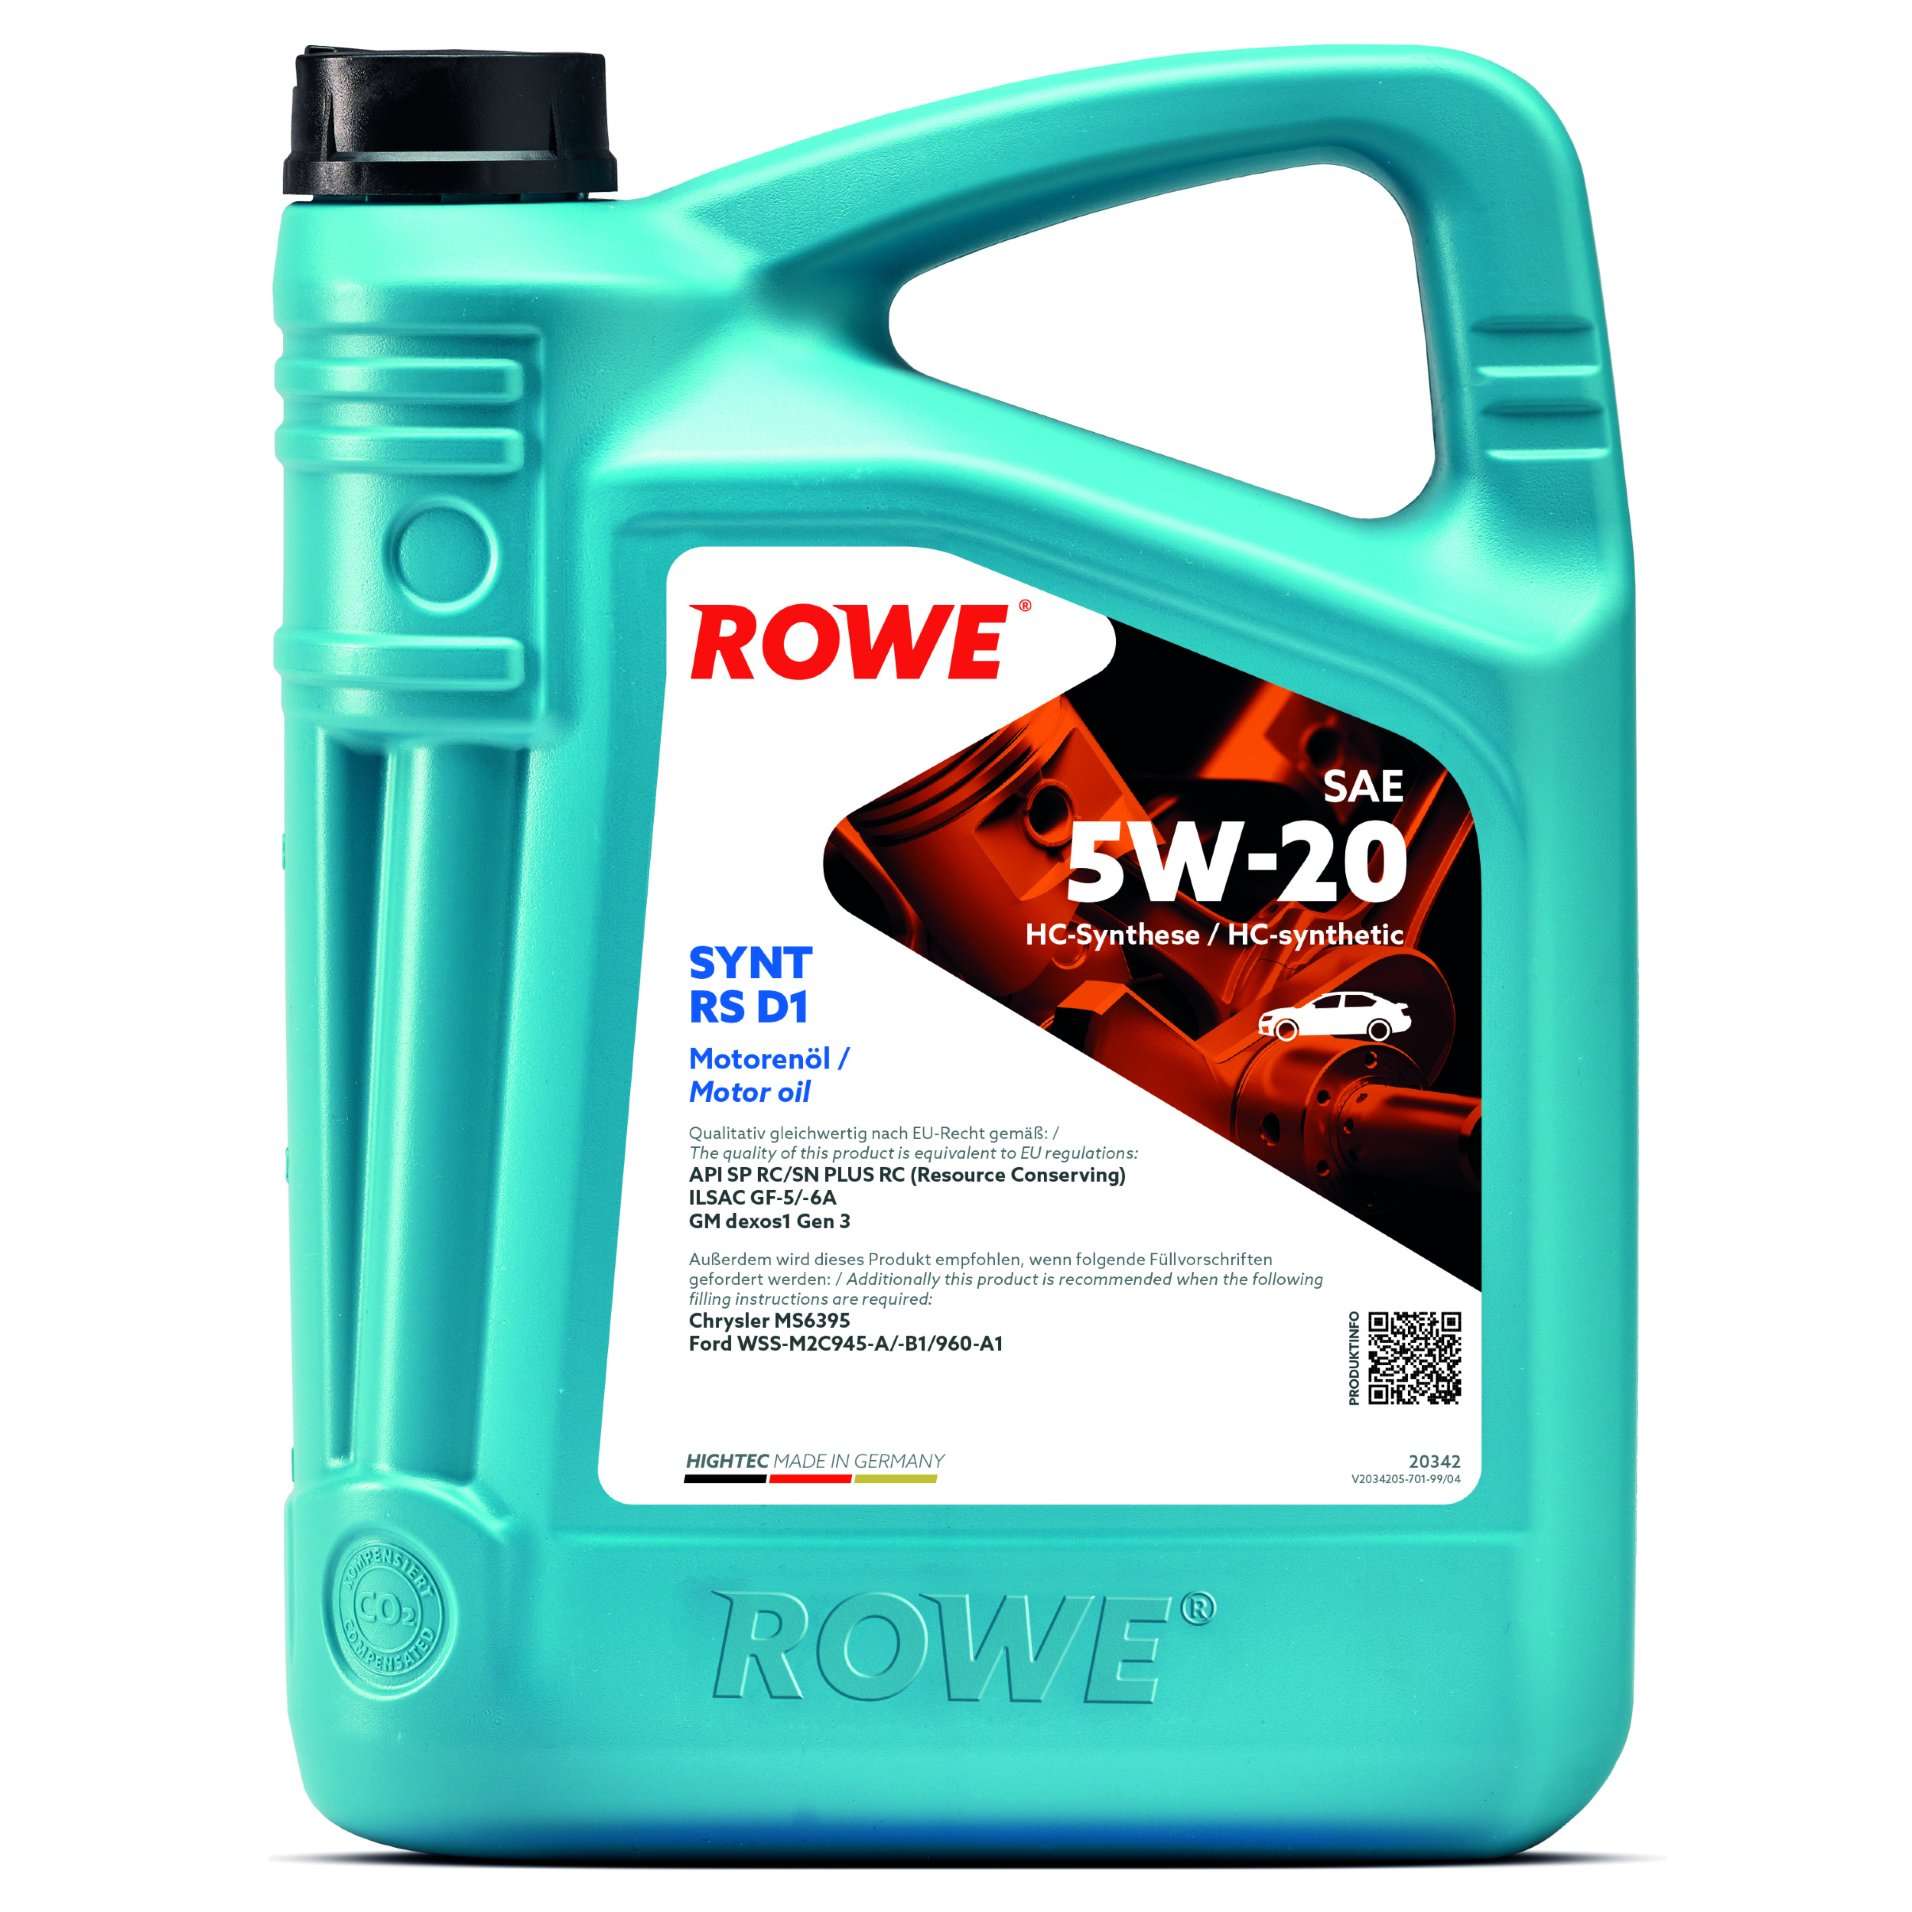 Моторное масло ROWE Synt RS D1 5W-20 5 л, 20342-0050-99